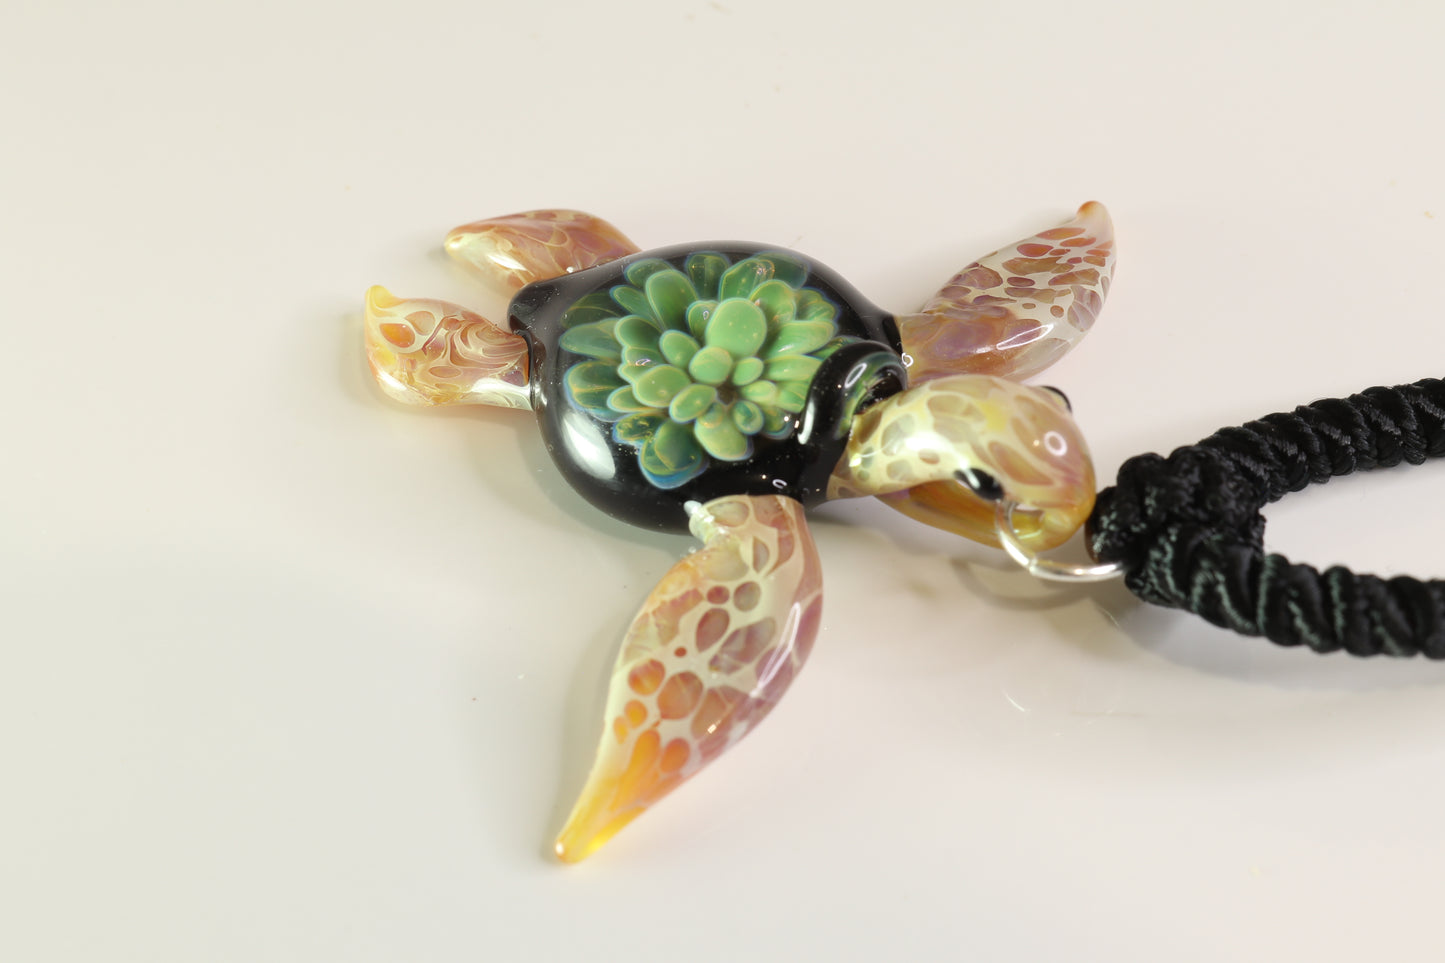 Exquisite Hawaiian Sea Turtle: Handcrafted Glass Pendant with Coral Reef Inside the Shell - GLASSnFIRE